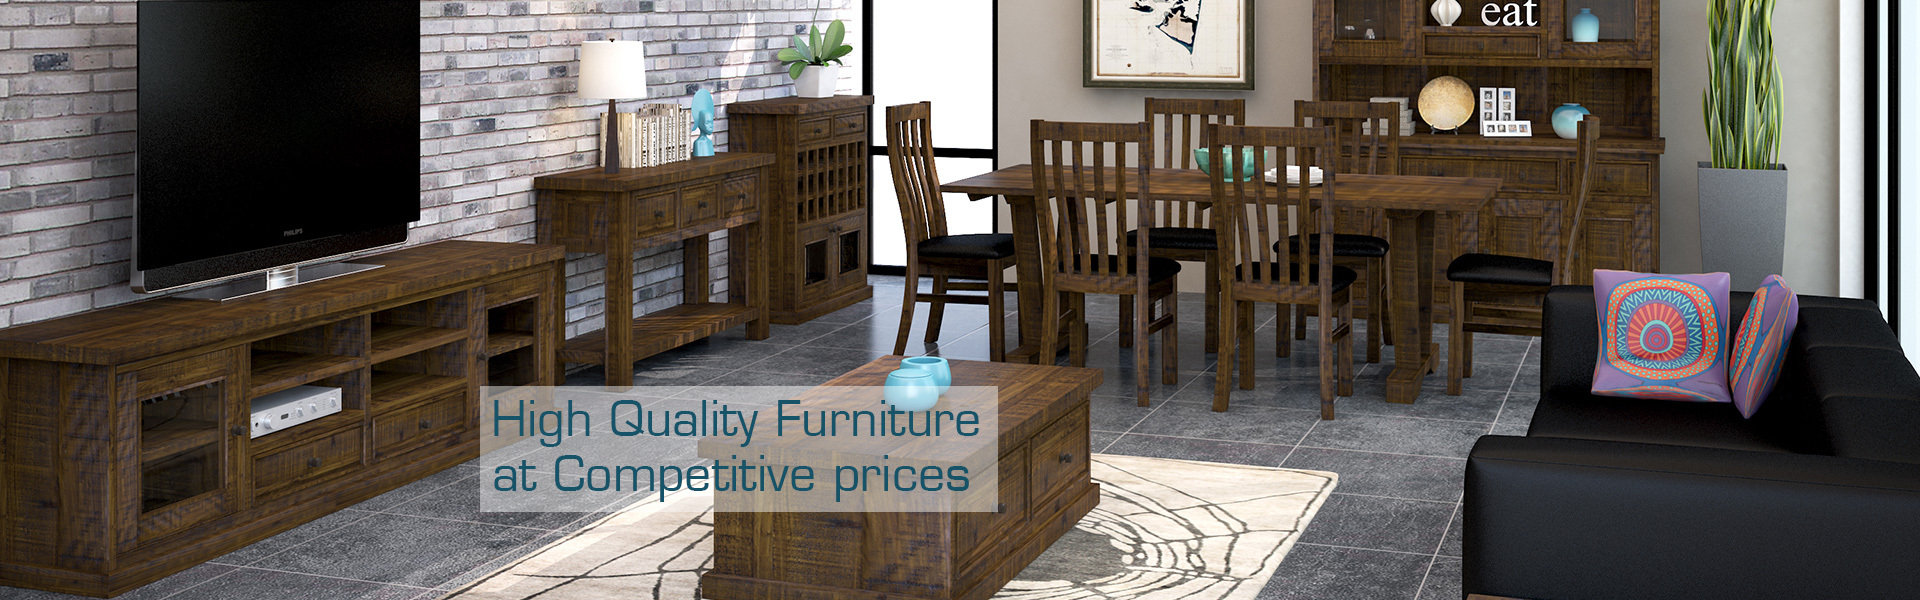 banner01_high_quality_furnitur_at_competitive_prices